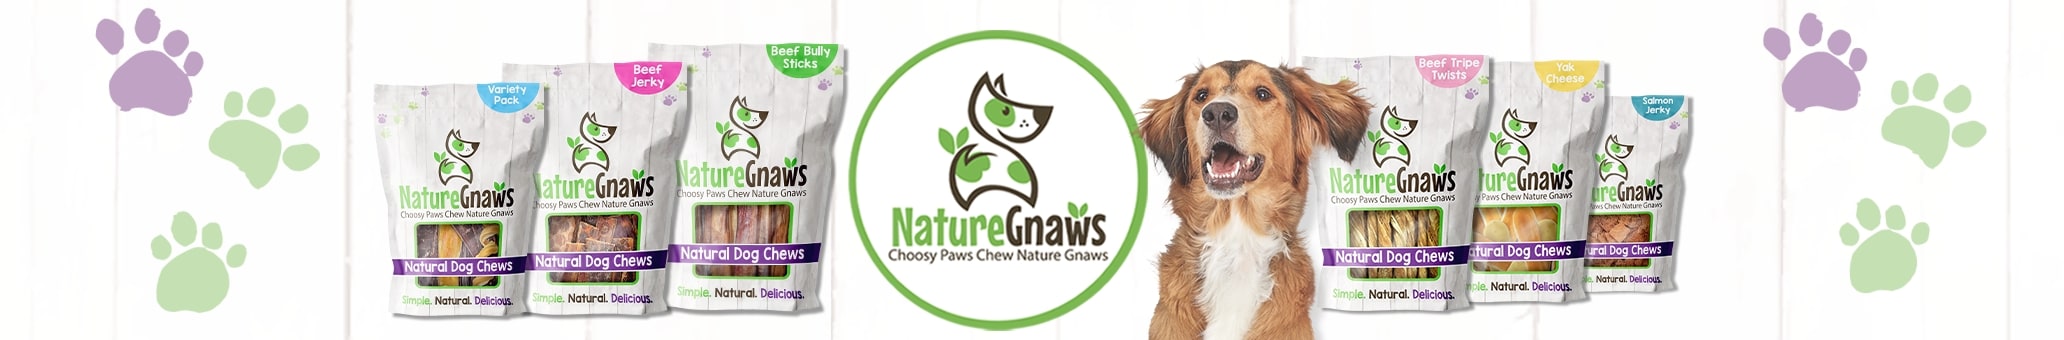 Nature Gnaws. Choosy Paws Choose Nature Gnaws.